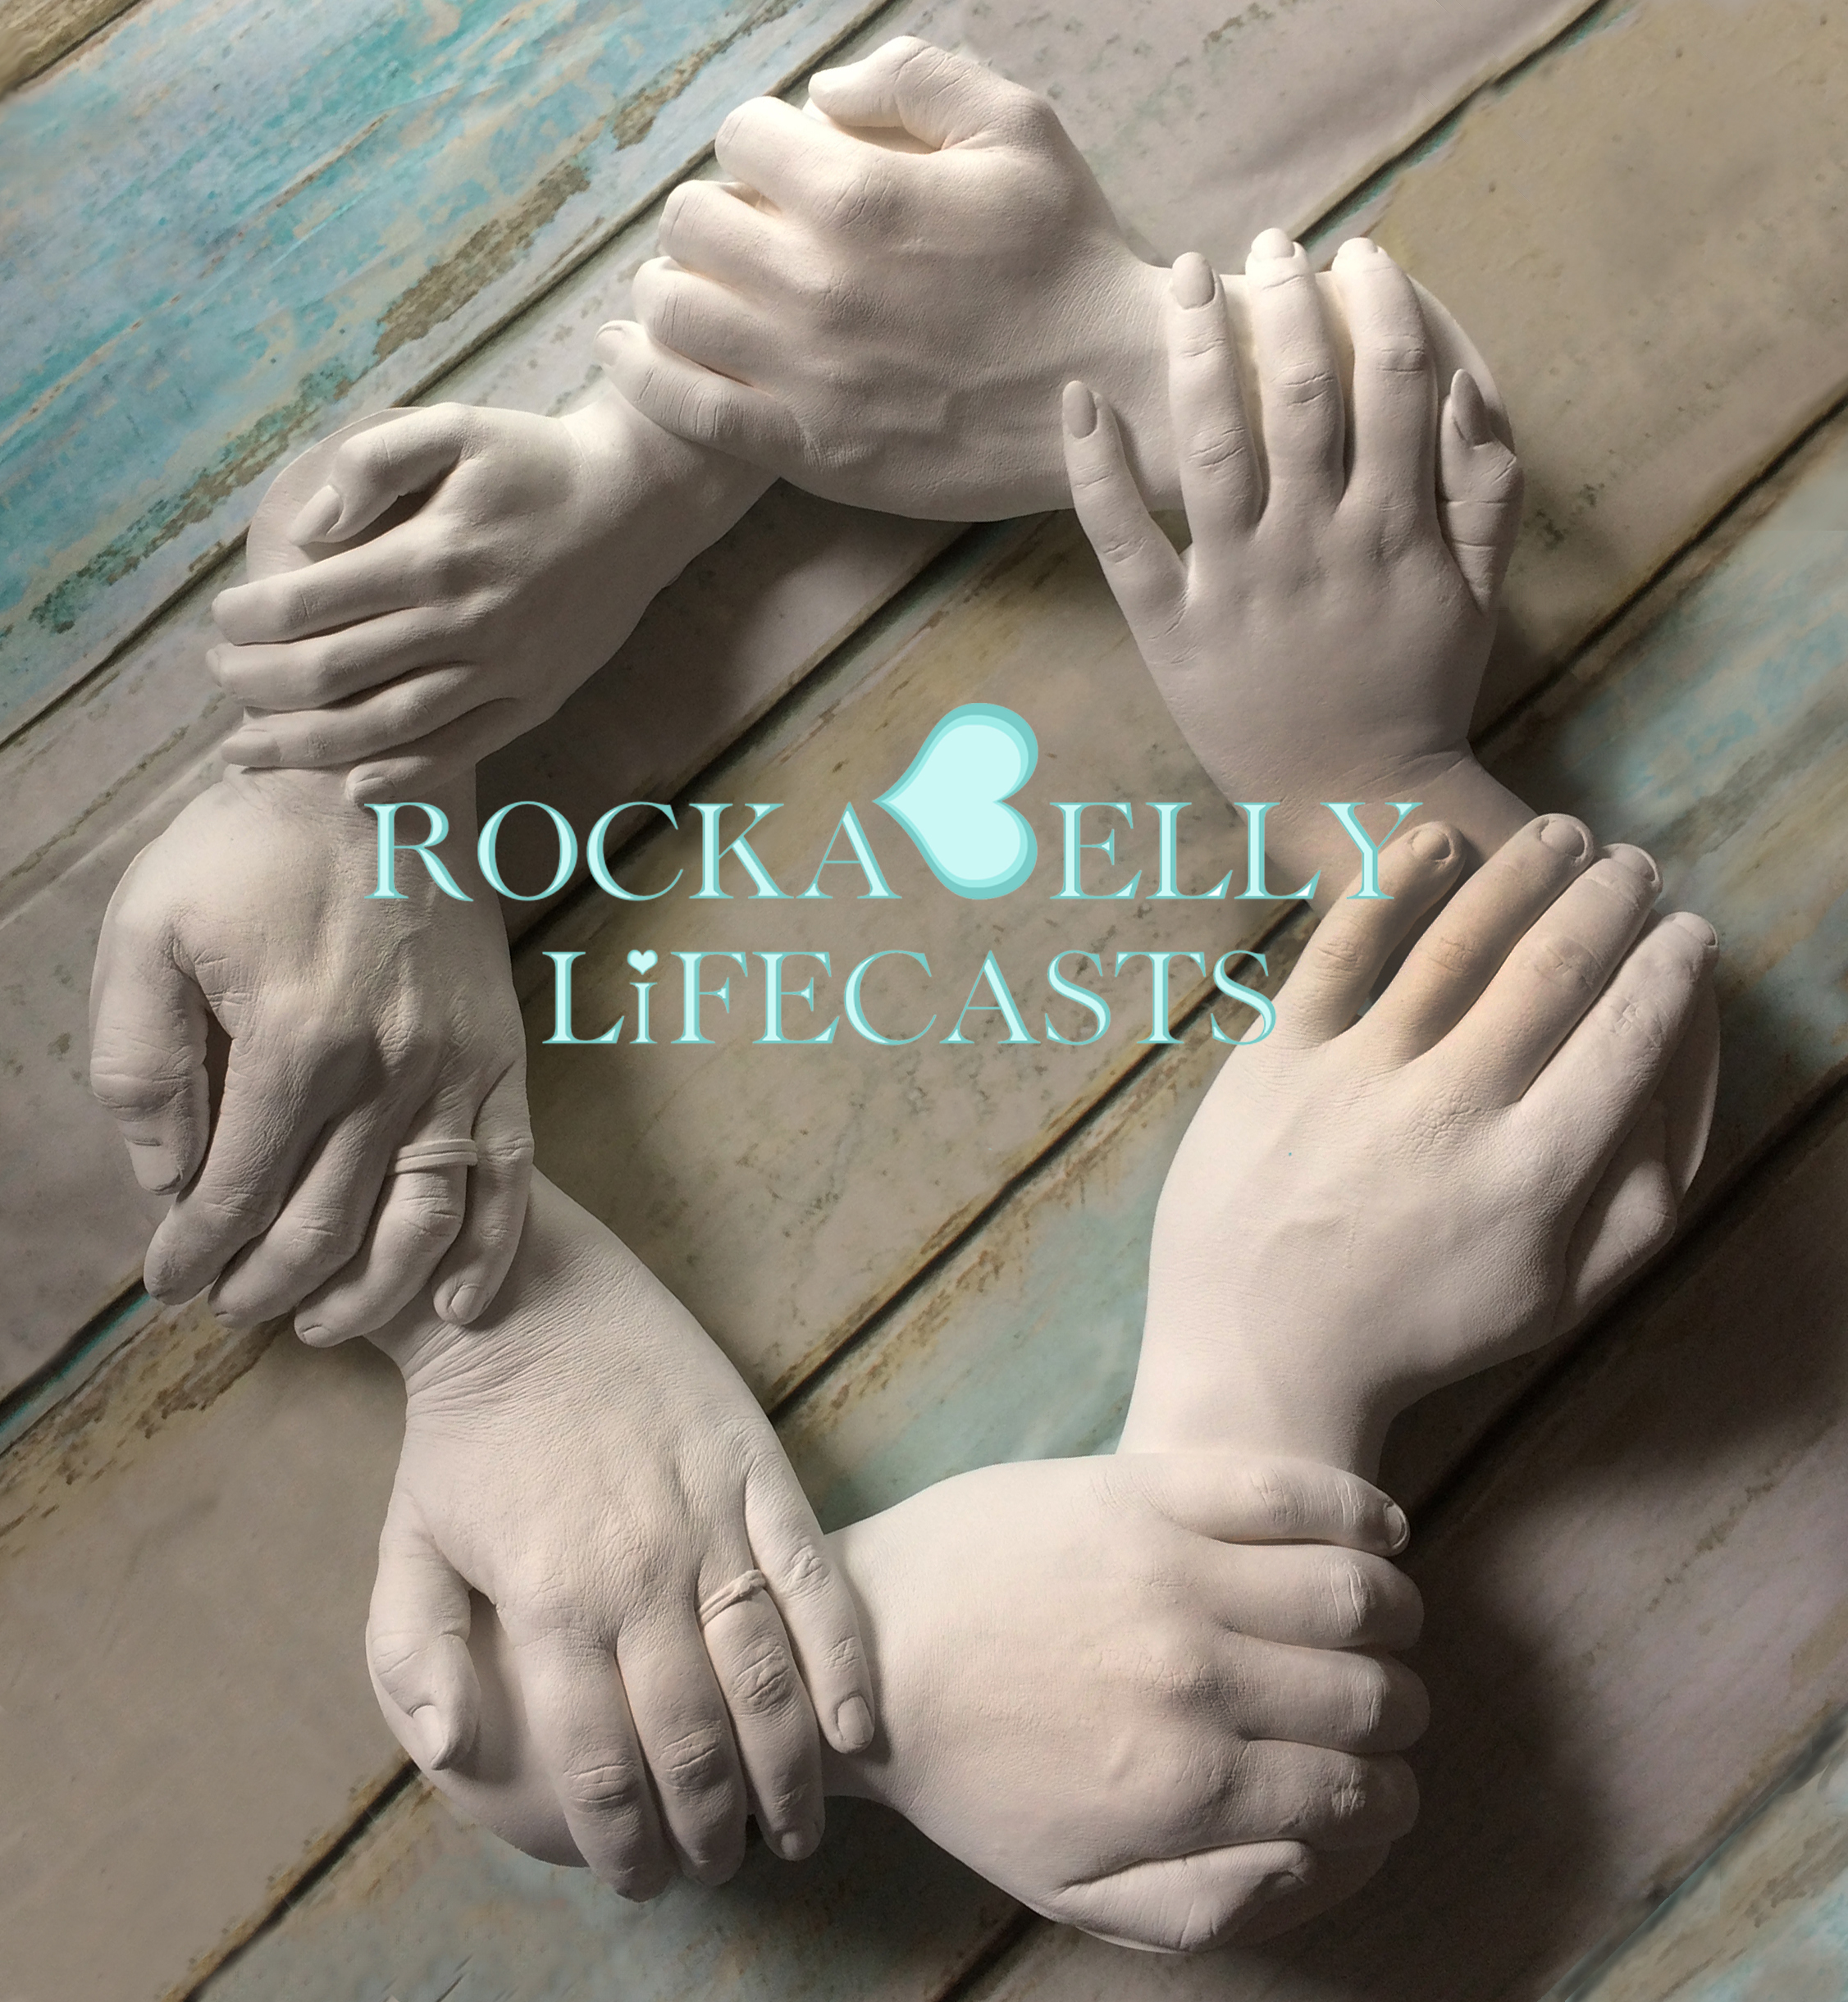 Rockabelly Lifecasts - casting services and kits — Rockabelly